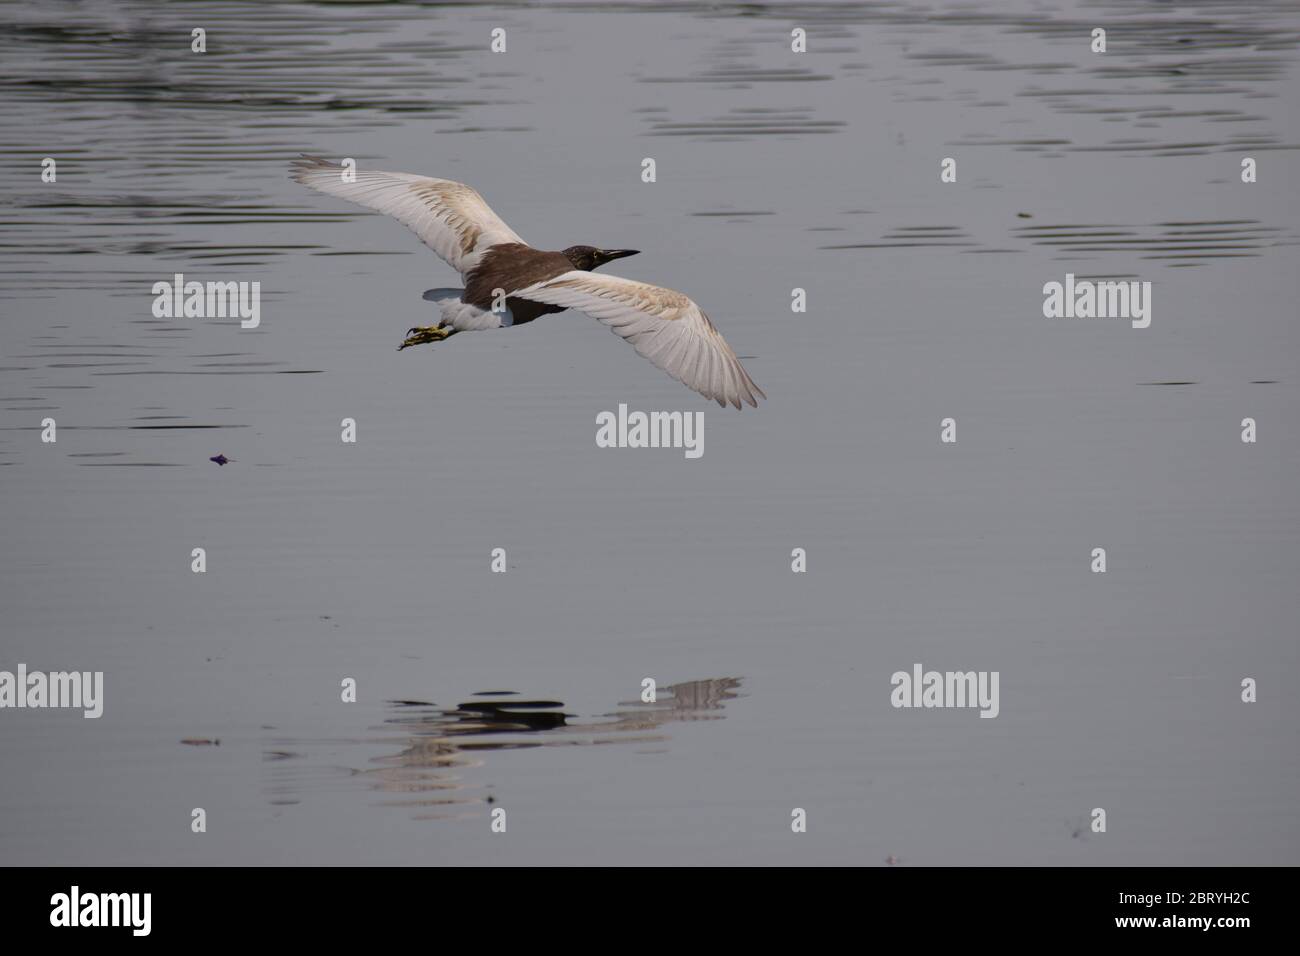 An Indian Pond Heron is flying just over lake water Stock Photo